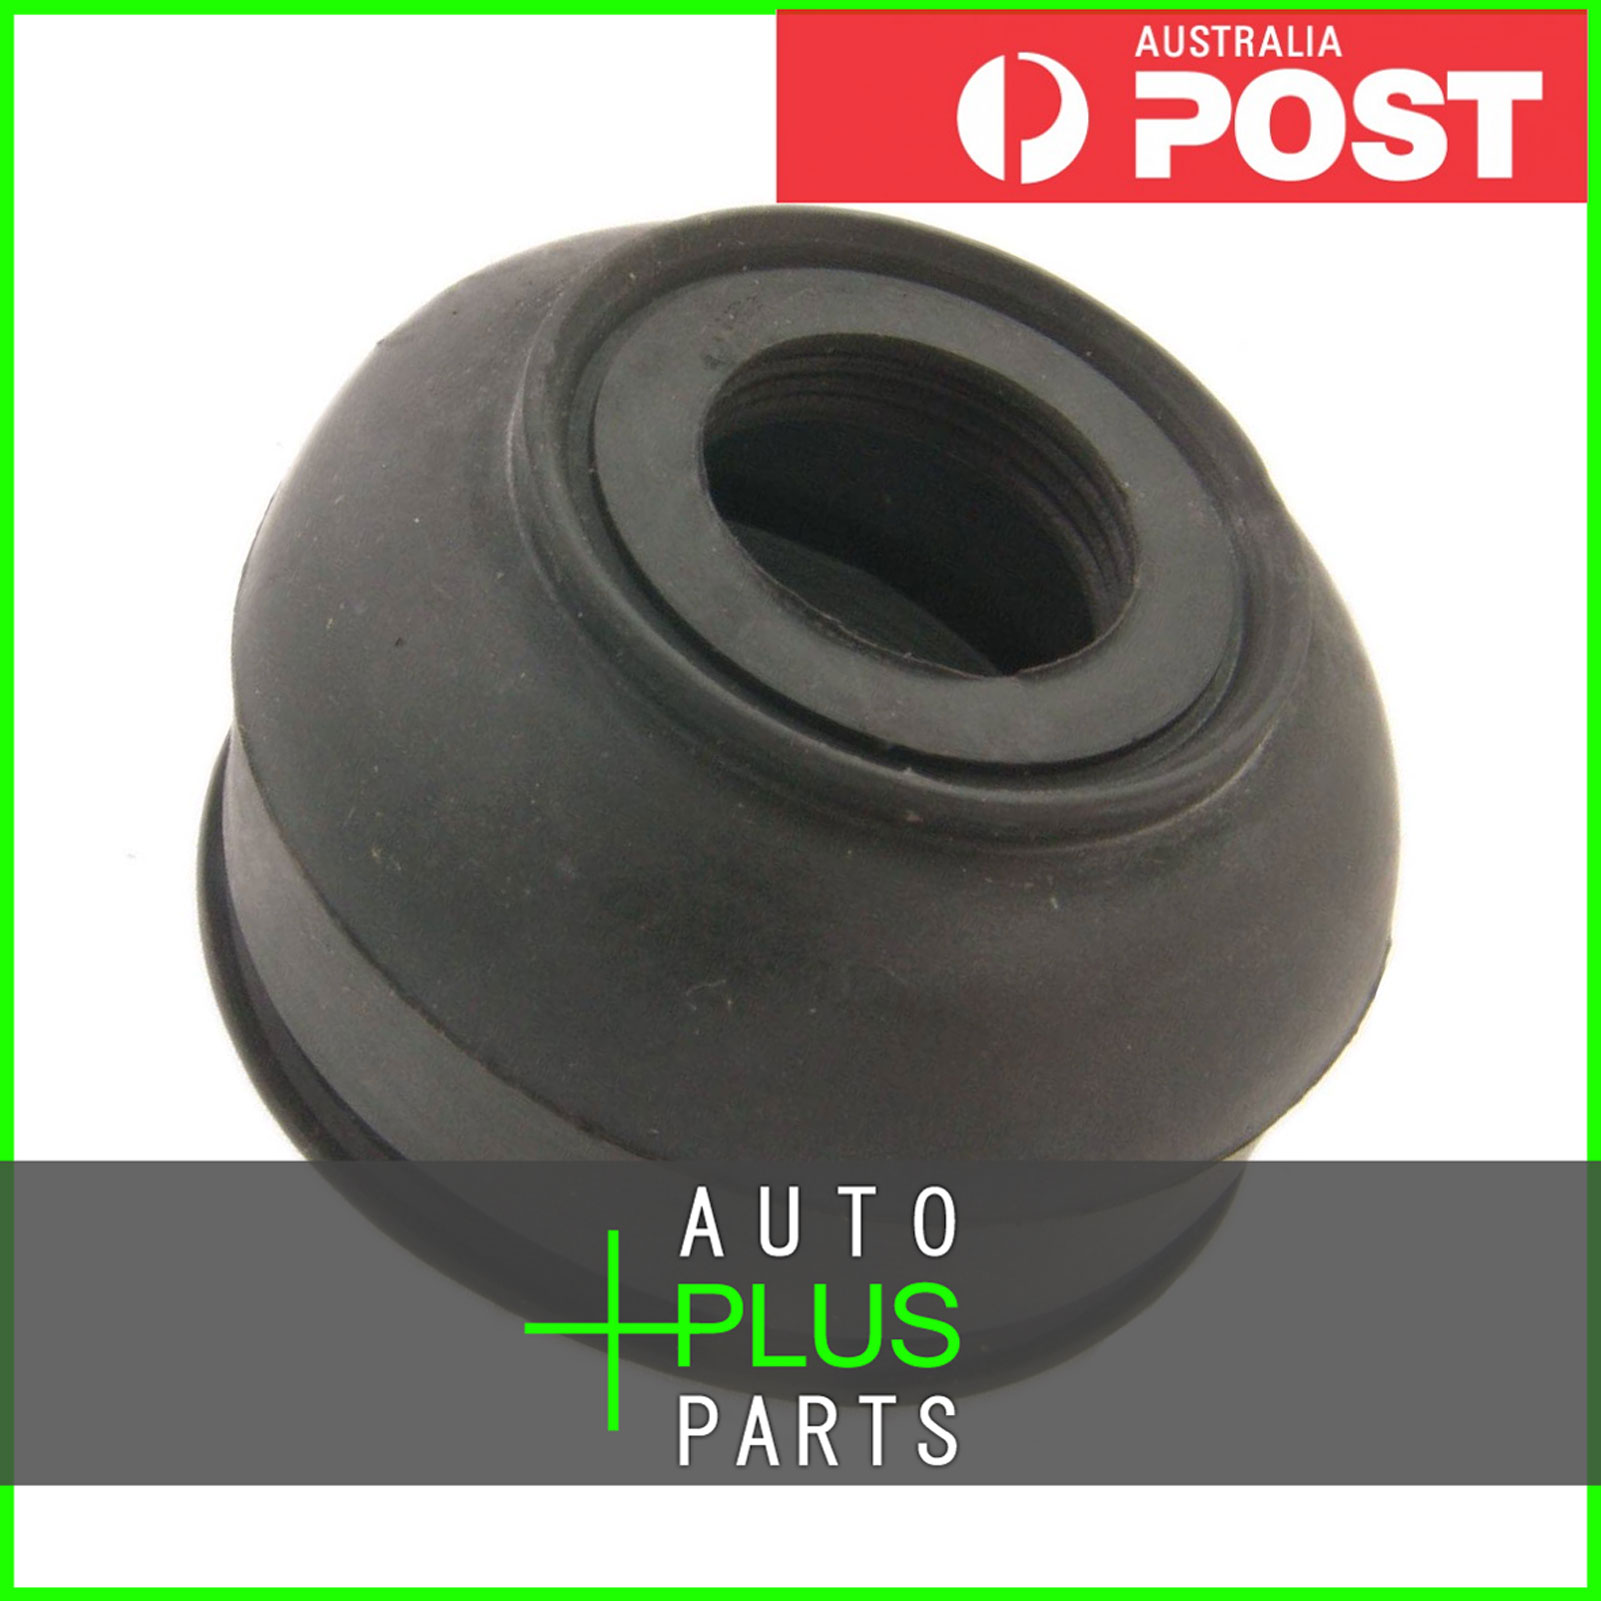 Fits TOYOTA CARINA 2 LOWER CONTROL ARM BALL JOINT BOOT 43X19.5X30.5 - AT17#,ST17 Product Photo